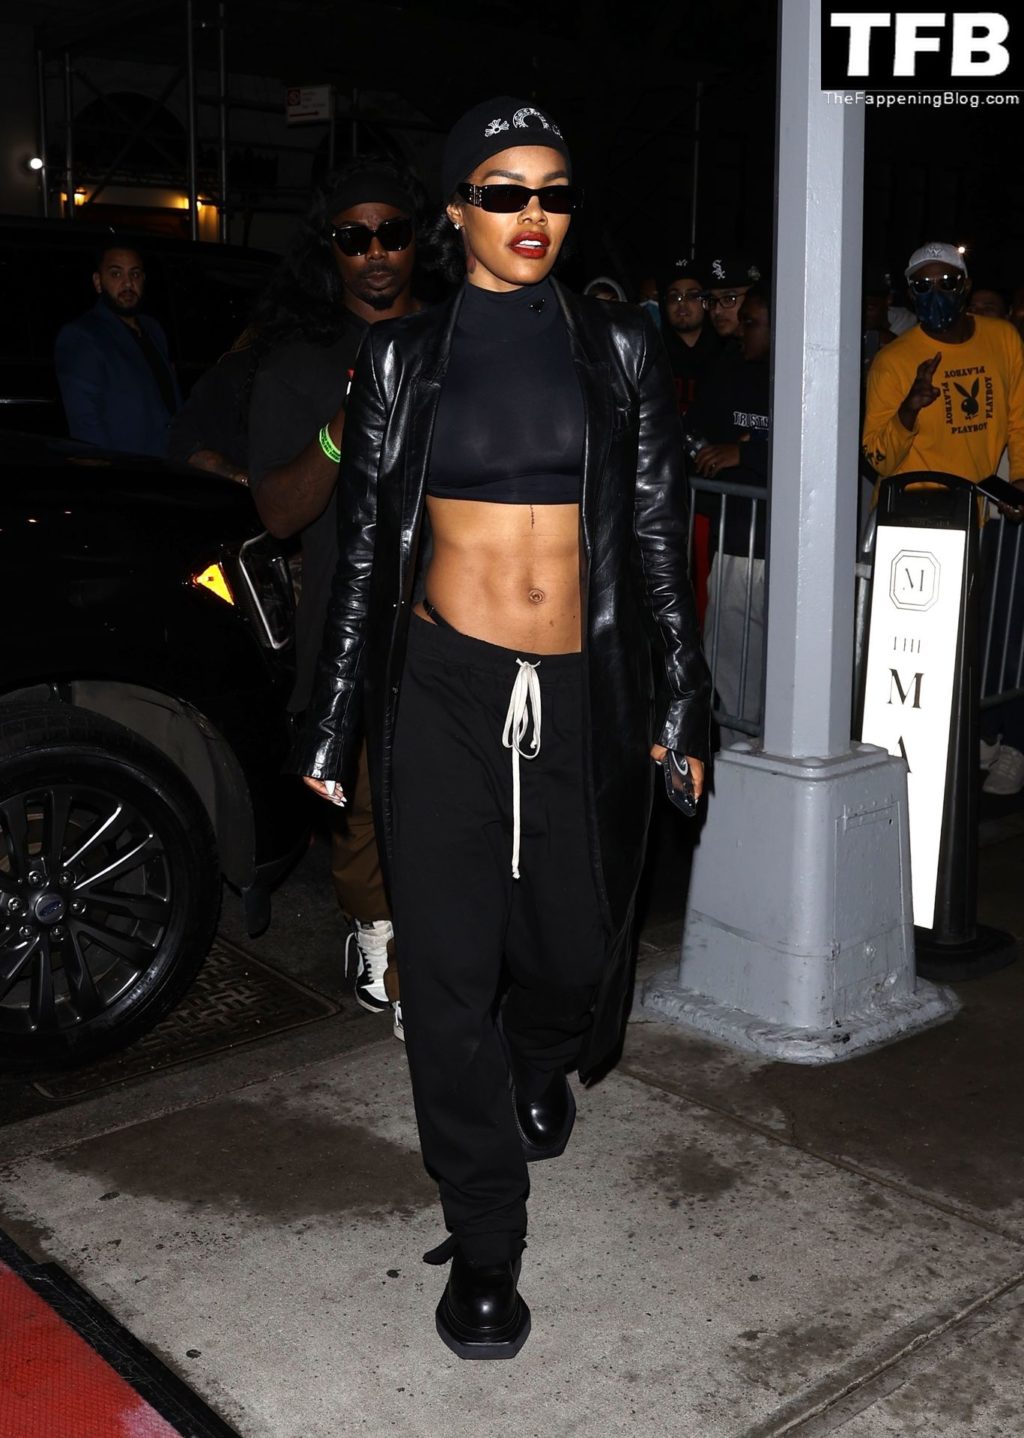 Teyana Taylor Sexy The Fappening Blog 7 1024x1438 - Teyana Taylor Shows Off Her Tits & 6 Pack as She Arrives at Her Hotel in NYC (17 Photos)